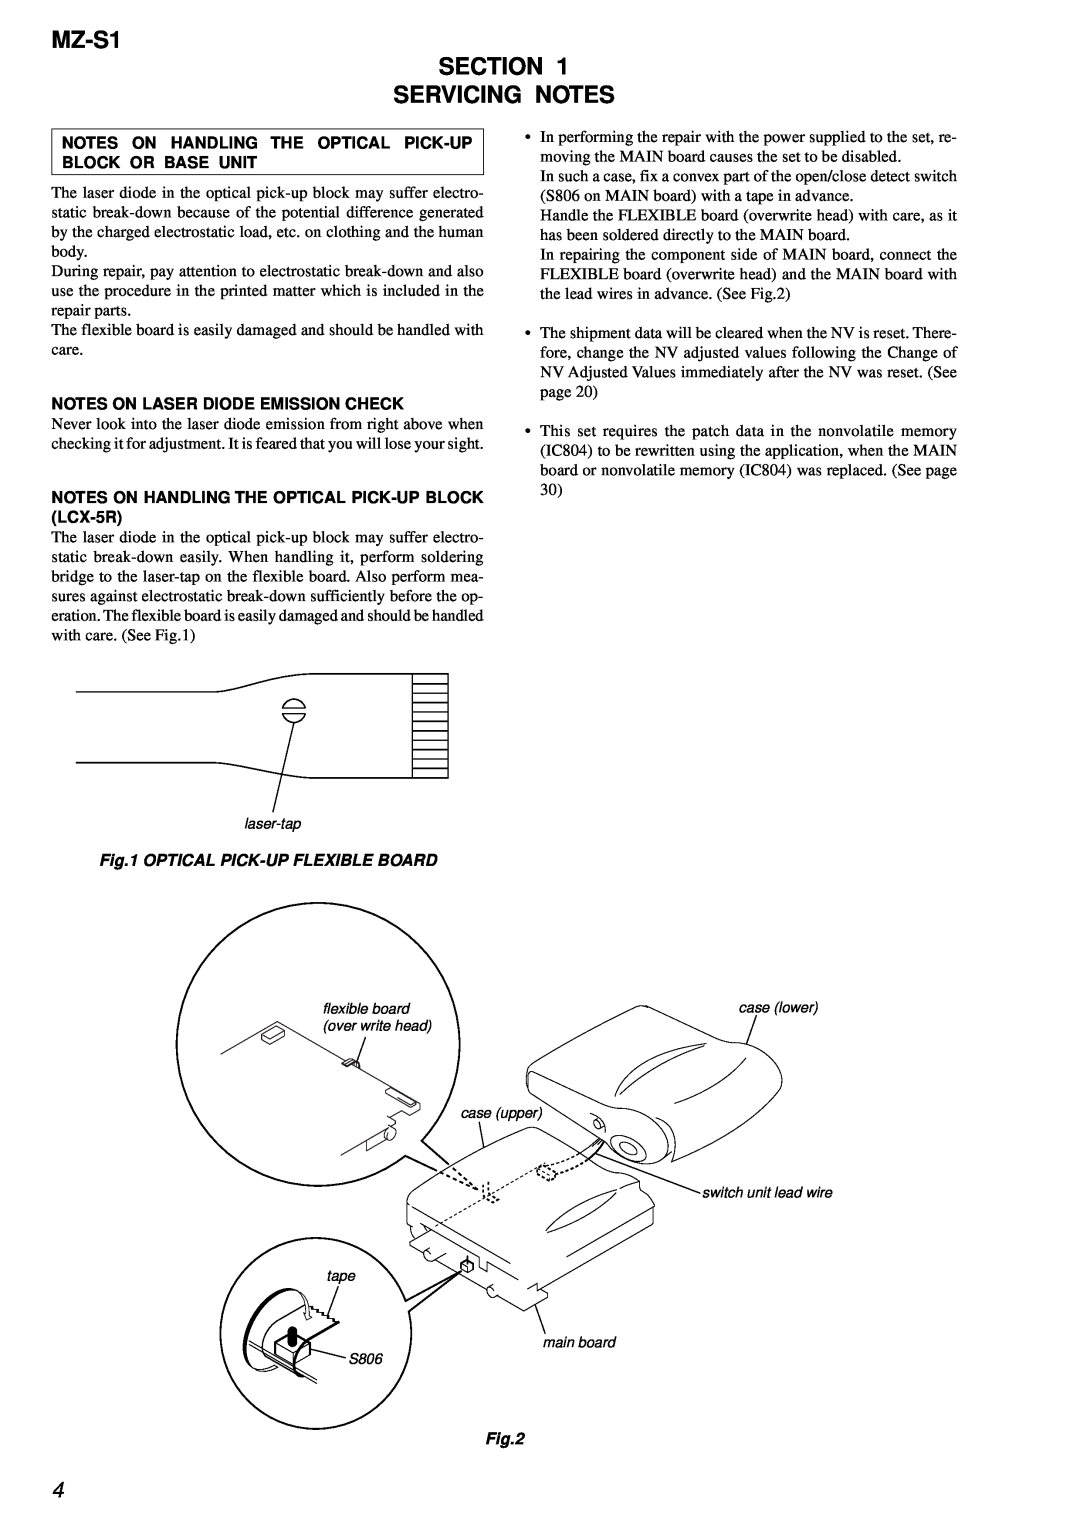 Sony service manual MZ-S1 SECTION SERVICING NOTES, Notes On Laser Diode Emission Check, Optical Pick-Upflexible Board 